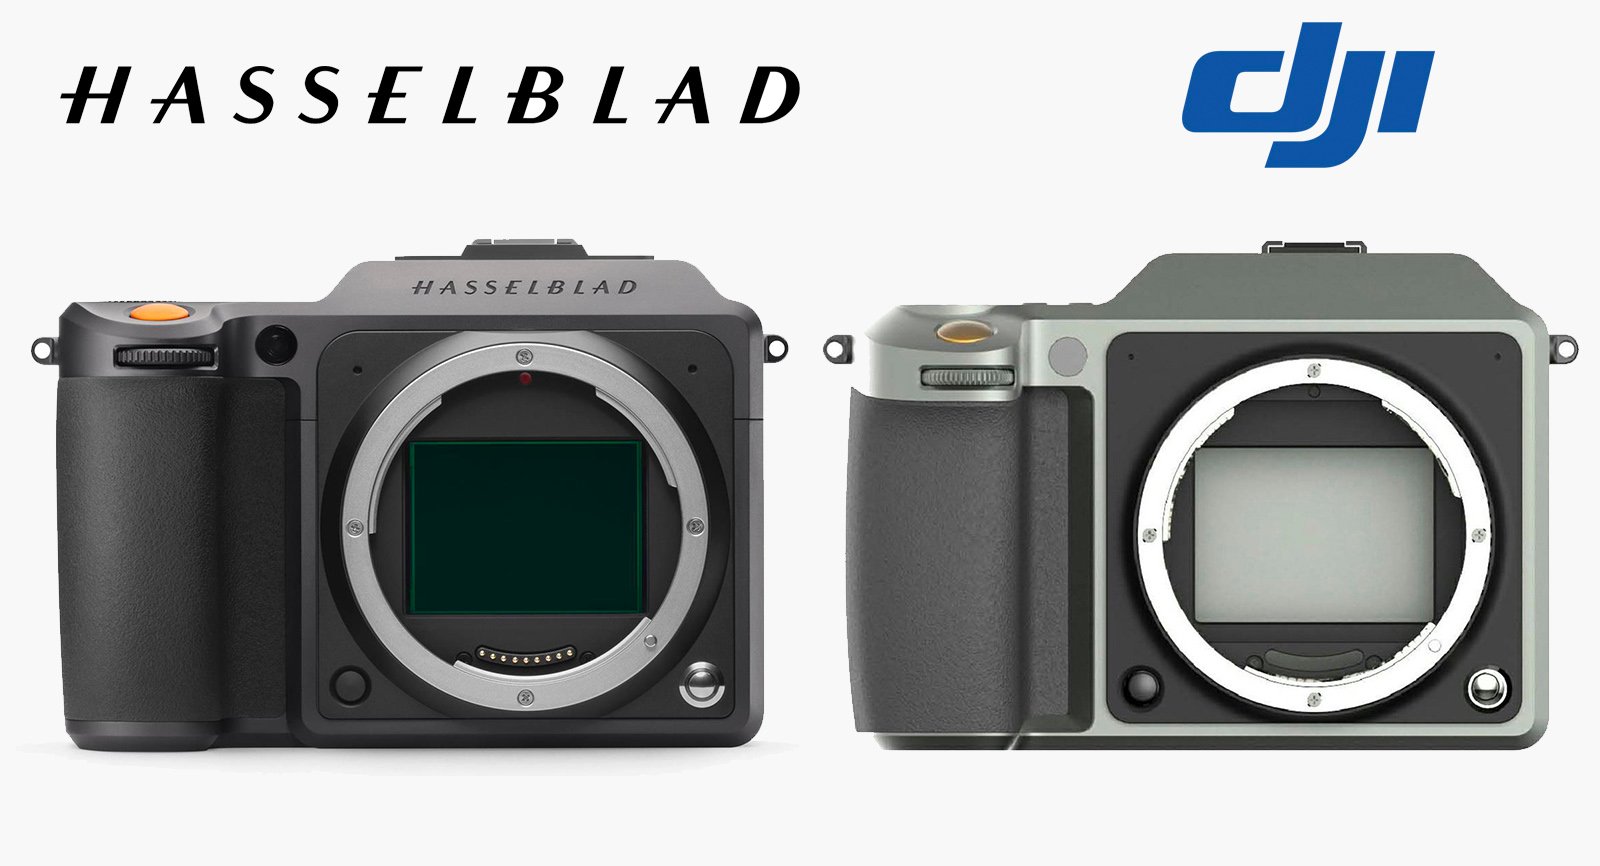 niveau fætter Baron Patent Shows DJI is Working on a Clone of the Hasselblad X1D | PetaPixel